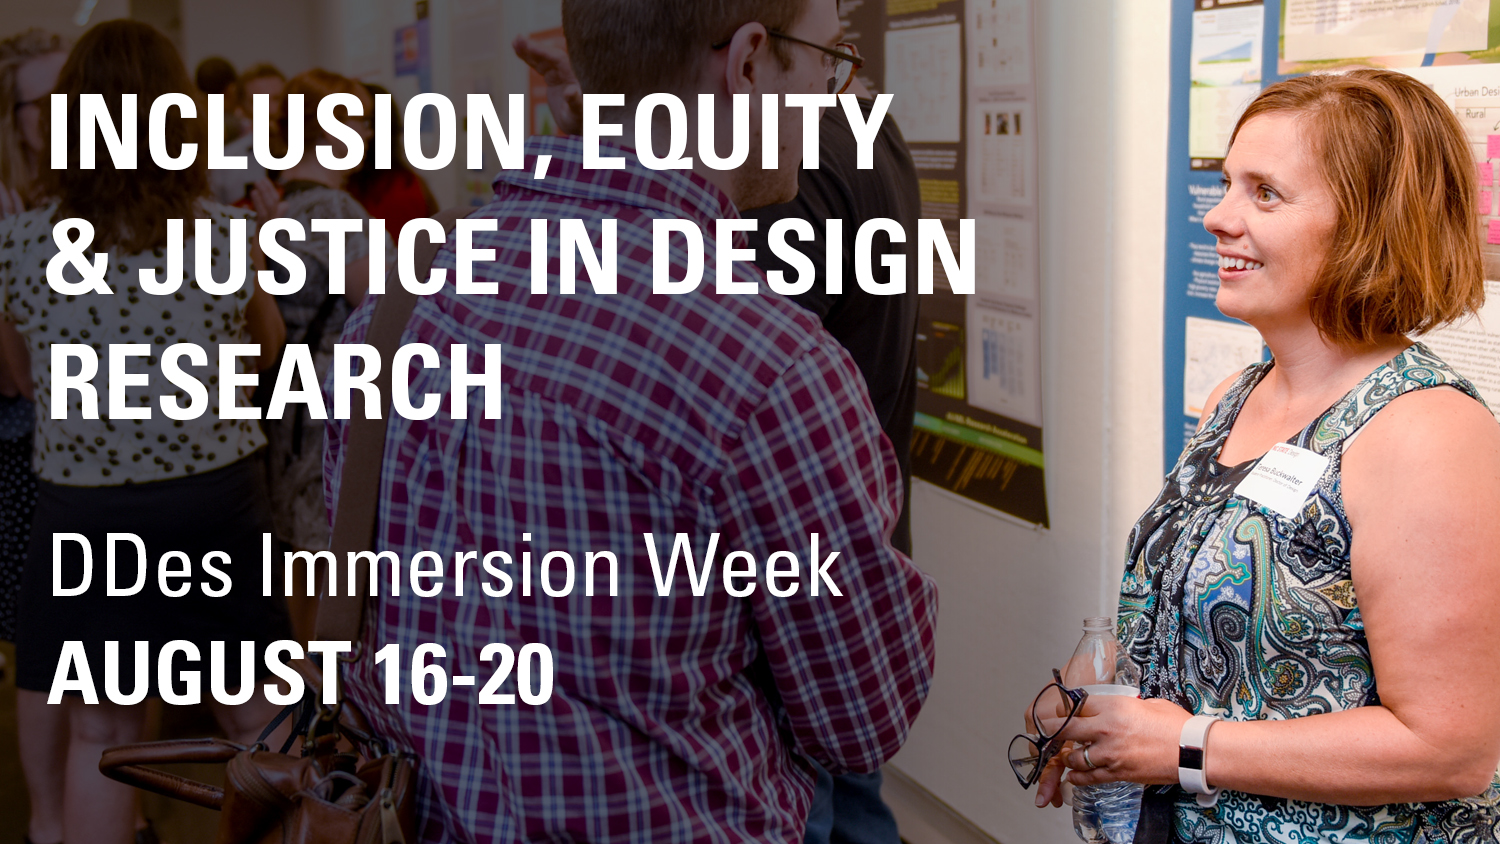 Inclusion, Equity and Justice in Design Research, DDes Immersion Week, August 16-20